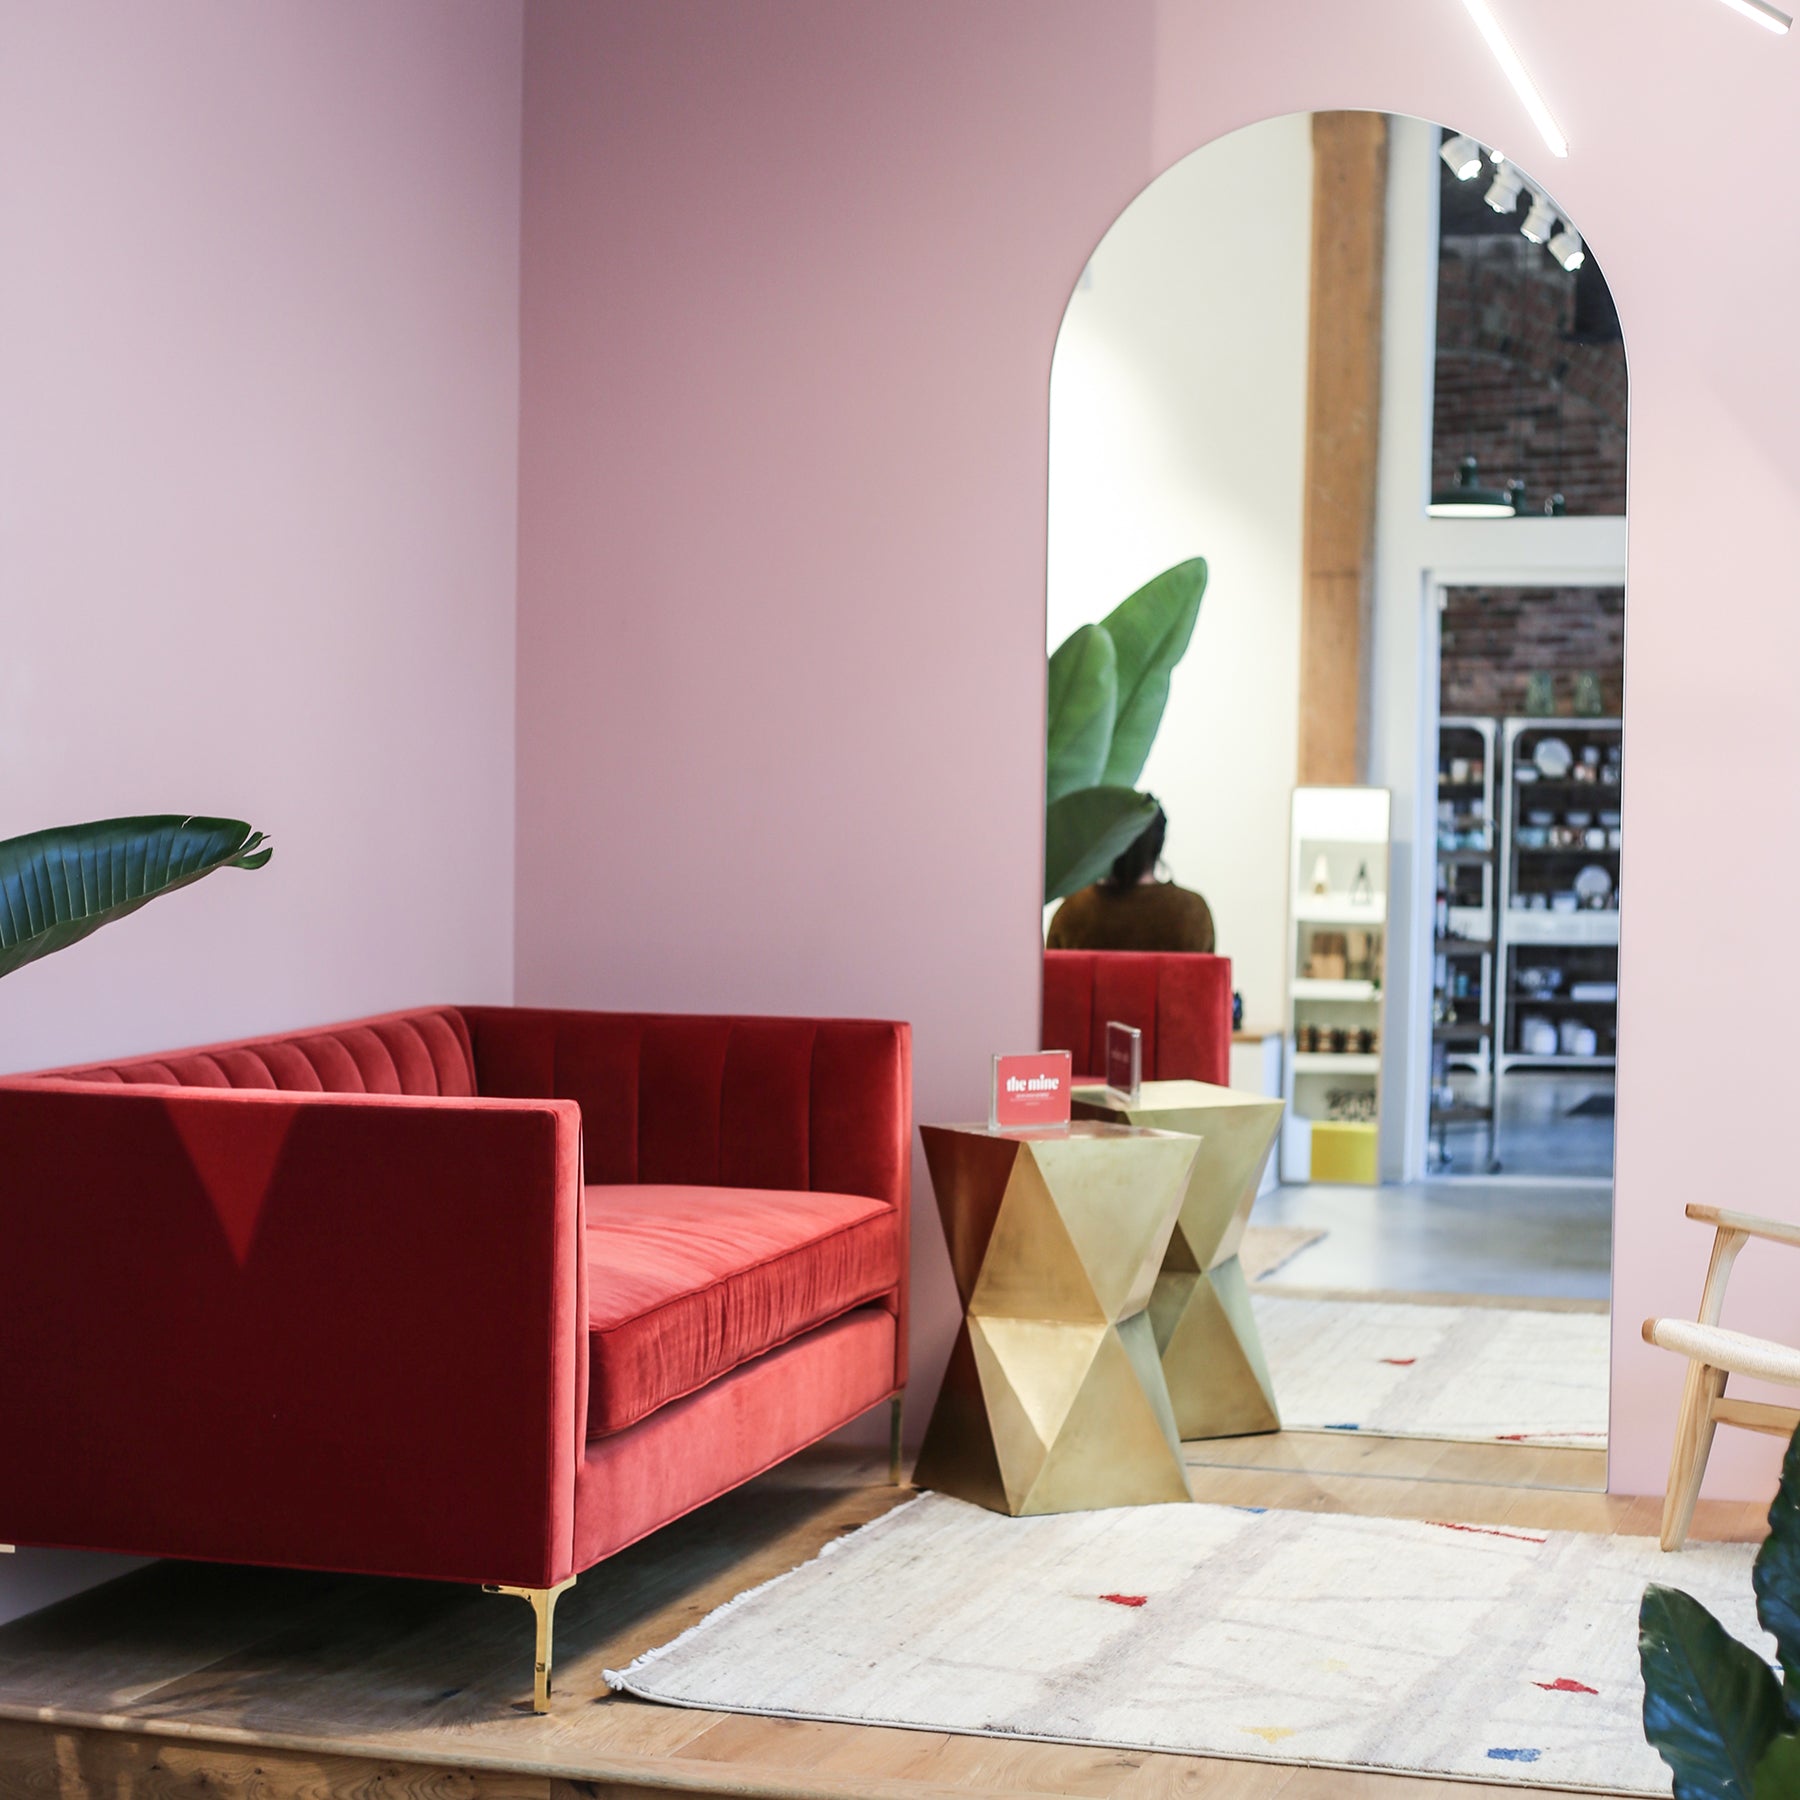 Interior of a store with pink walls and a red couch